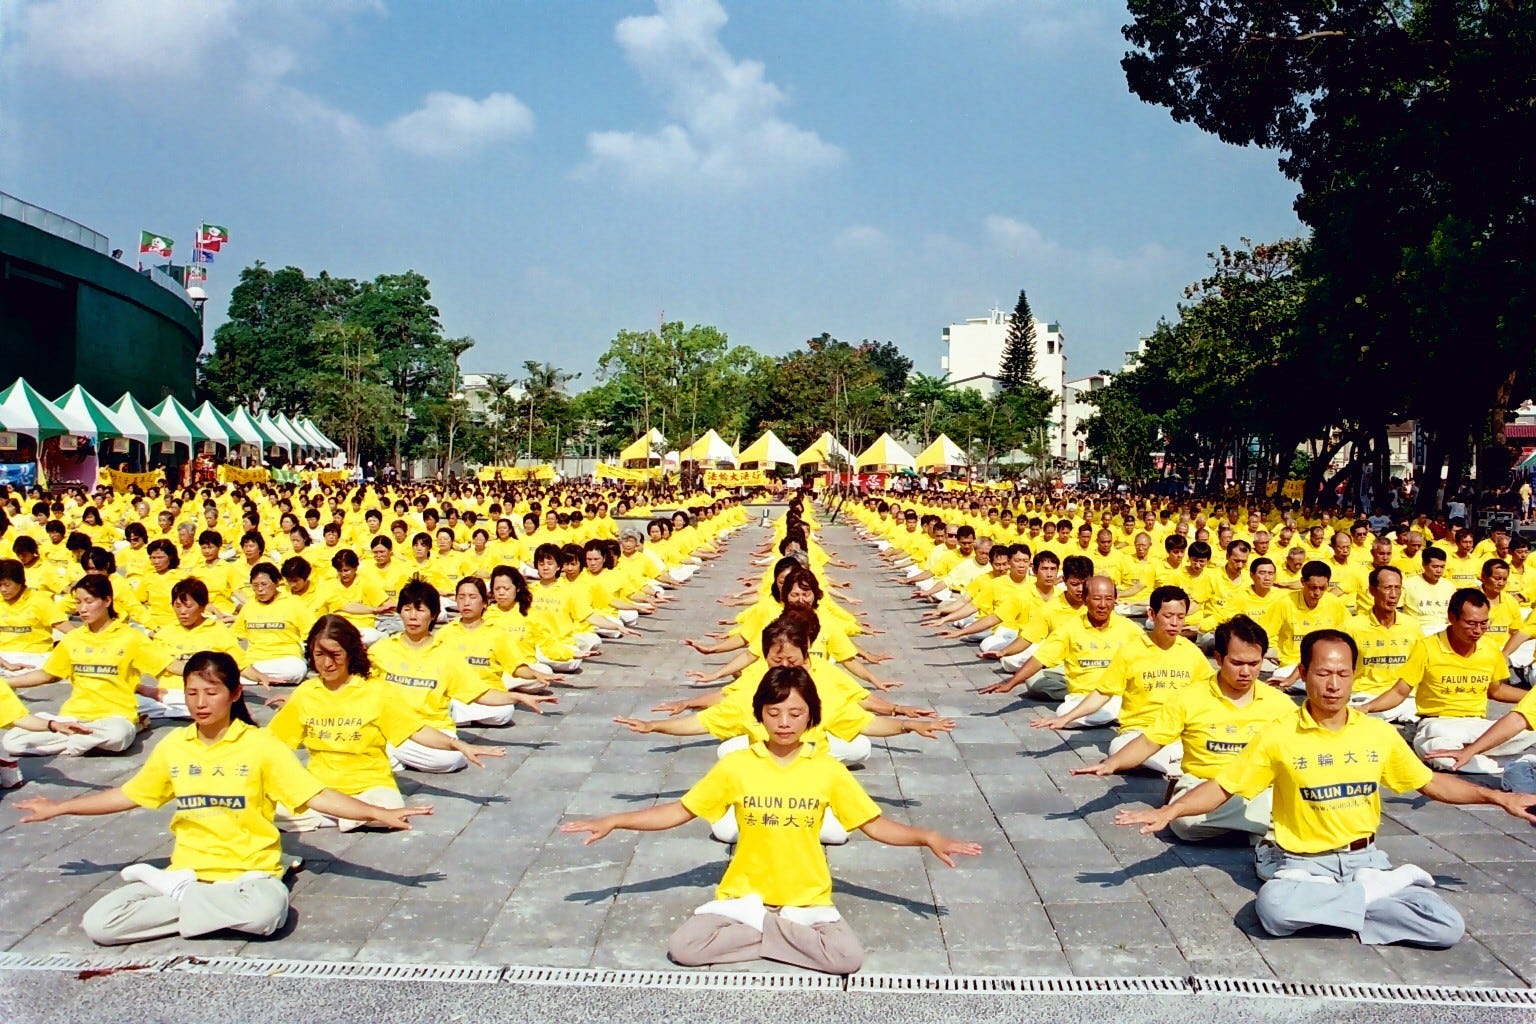 Me and Li — Why I left Falun Gong after being a devoted believer for a  decade | by Ben Hurley | Medium